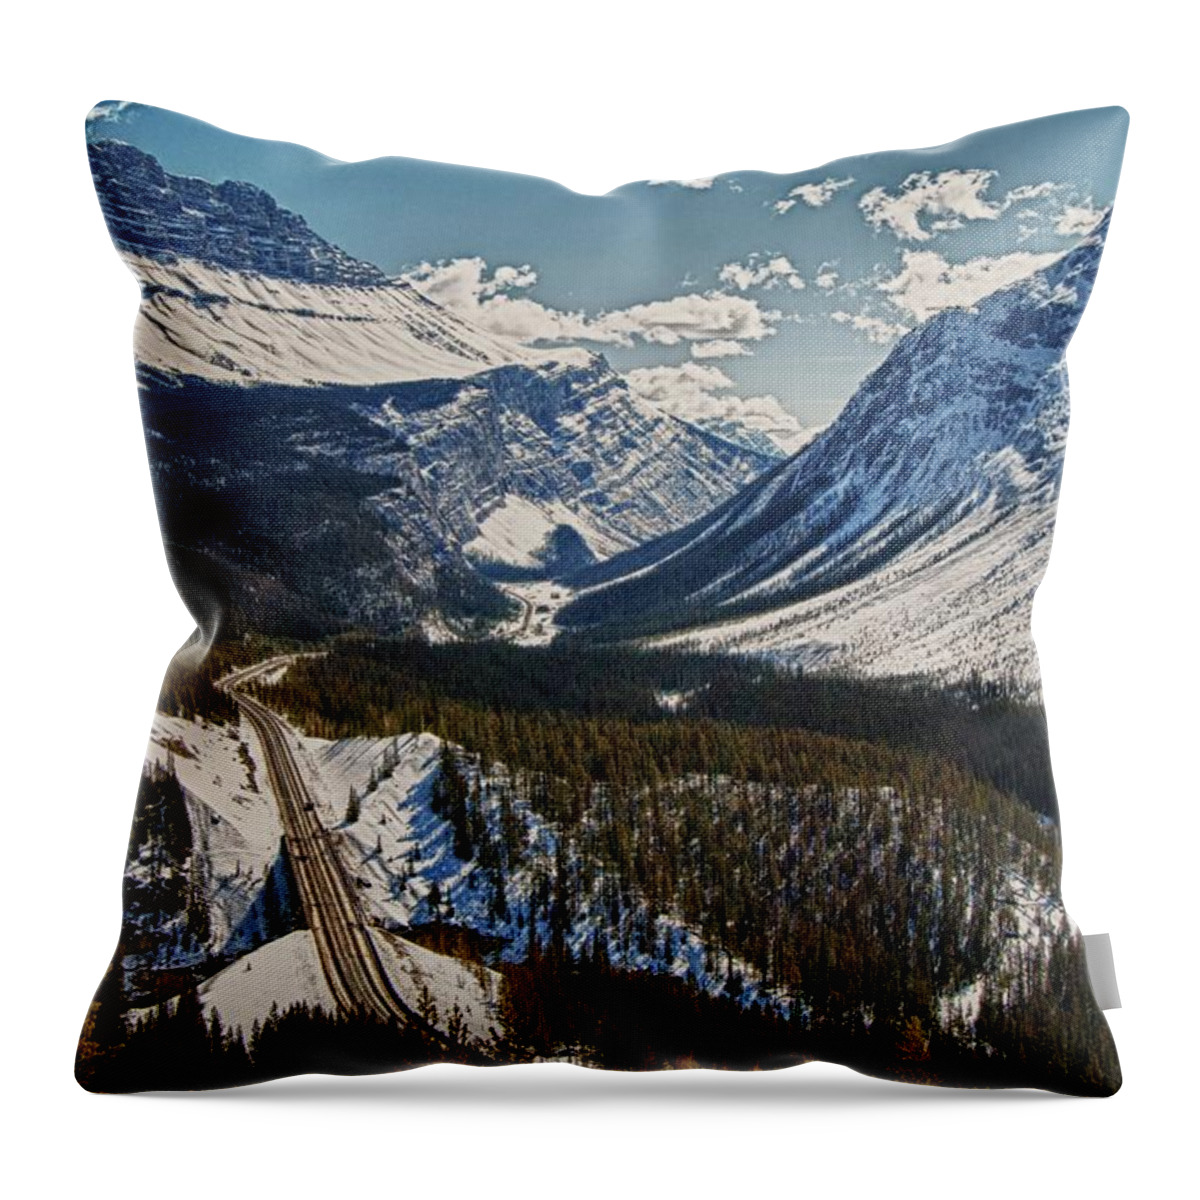 Scenics Throw Pillow featuring the photograph Banff Icefields Parkway Sunwapta Pass by © Anthony Maw, Vancouver, Canada